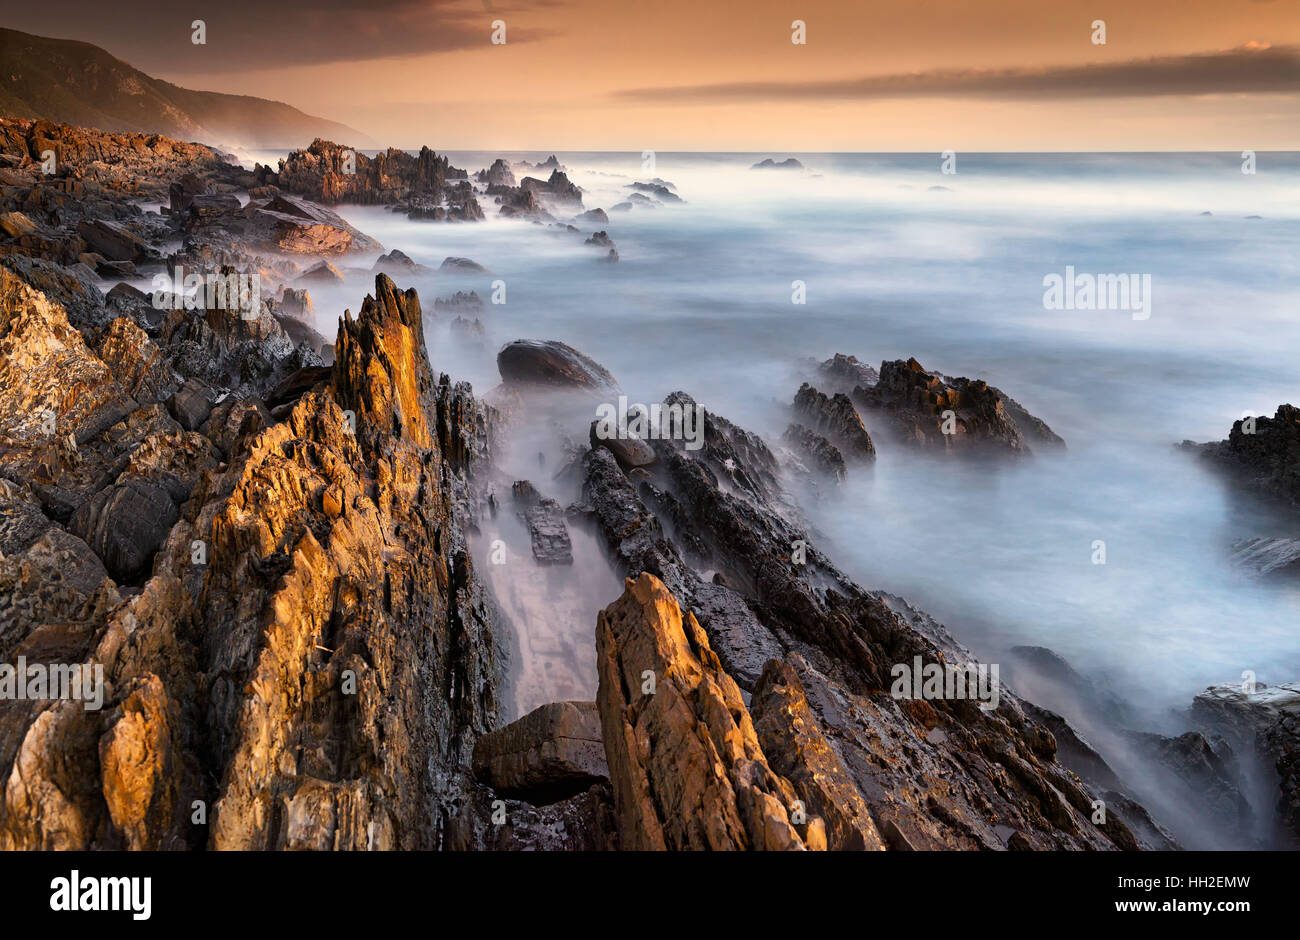 Long exposure of jagged coastal rocks at Storm's River, South Africa Stock Photo